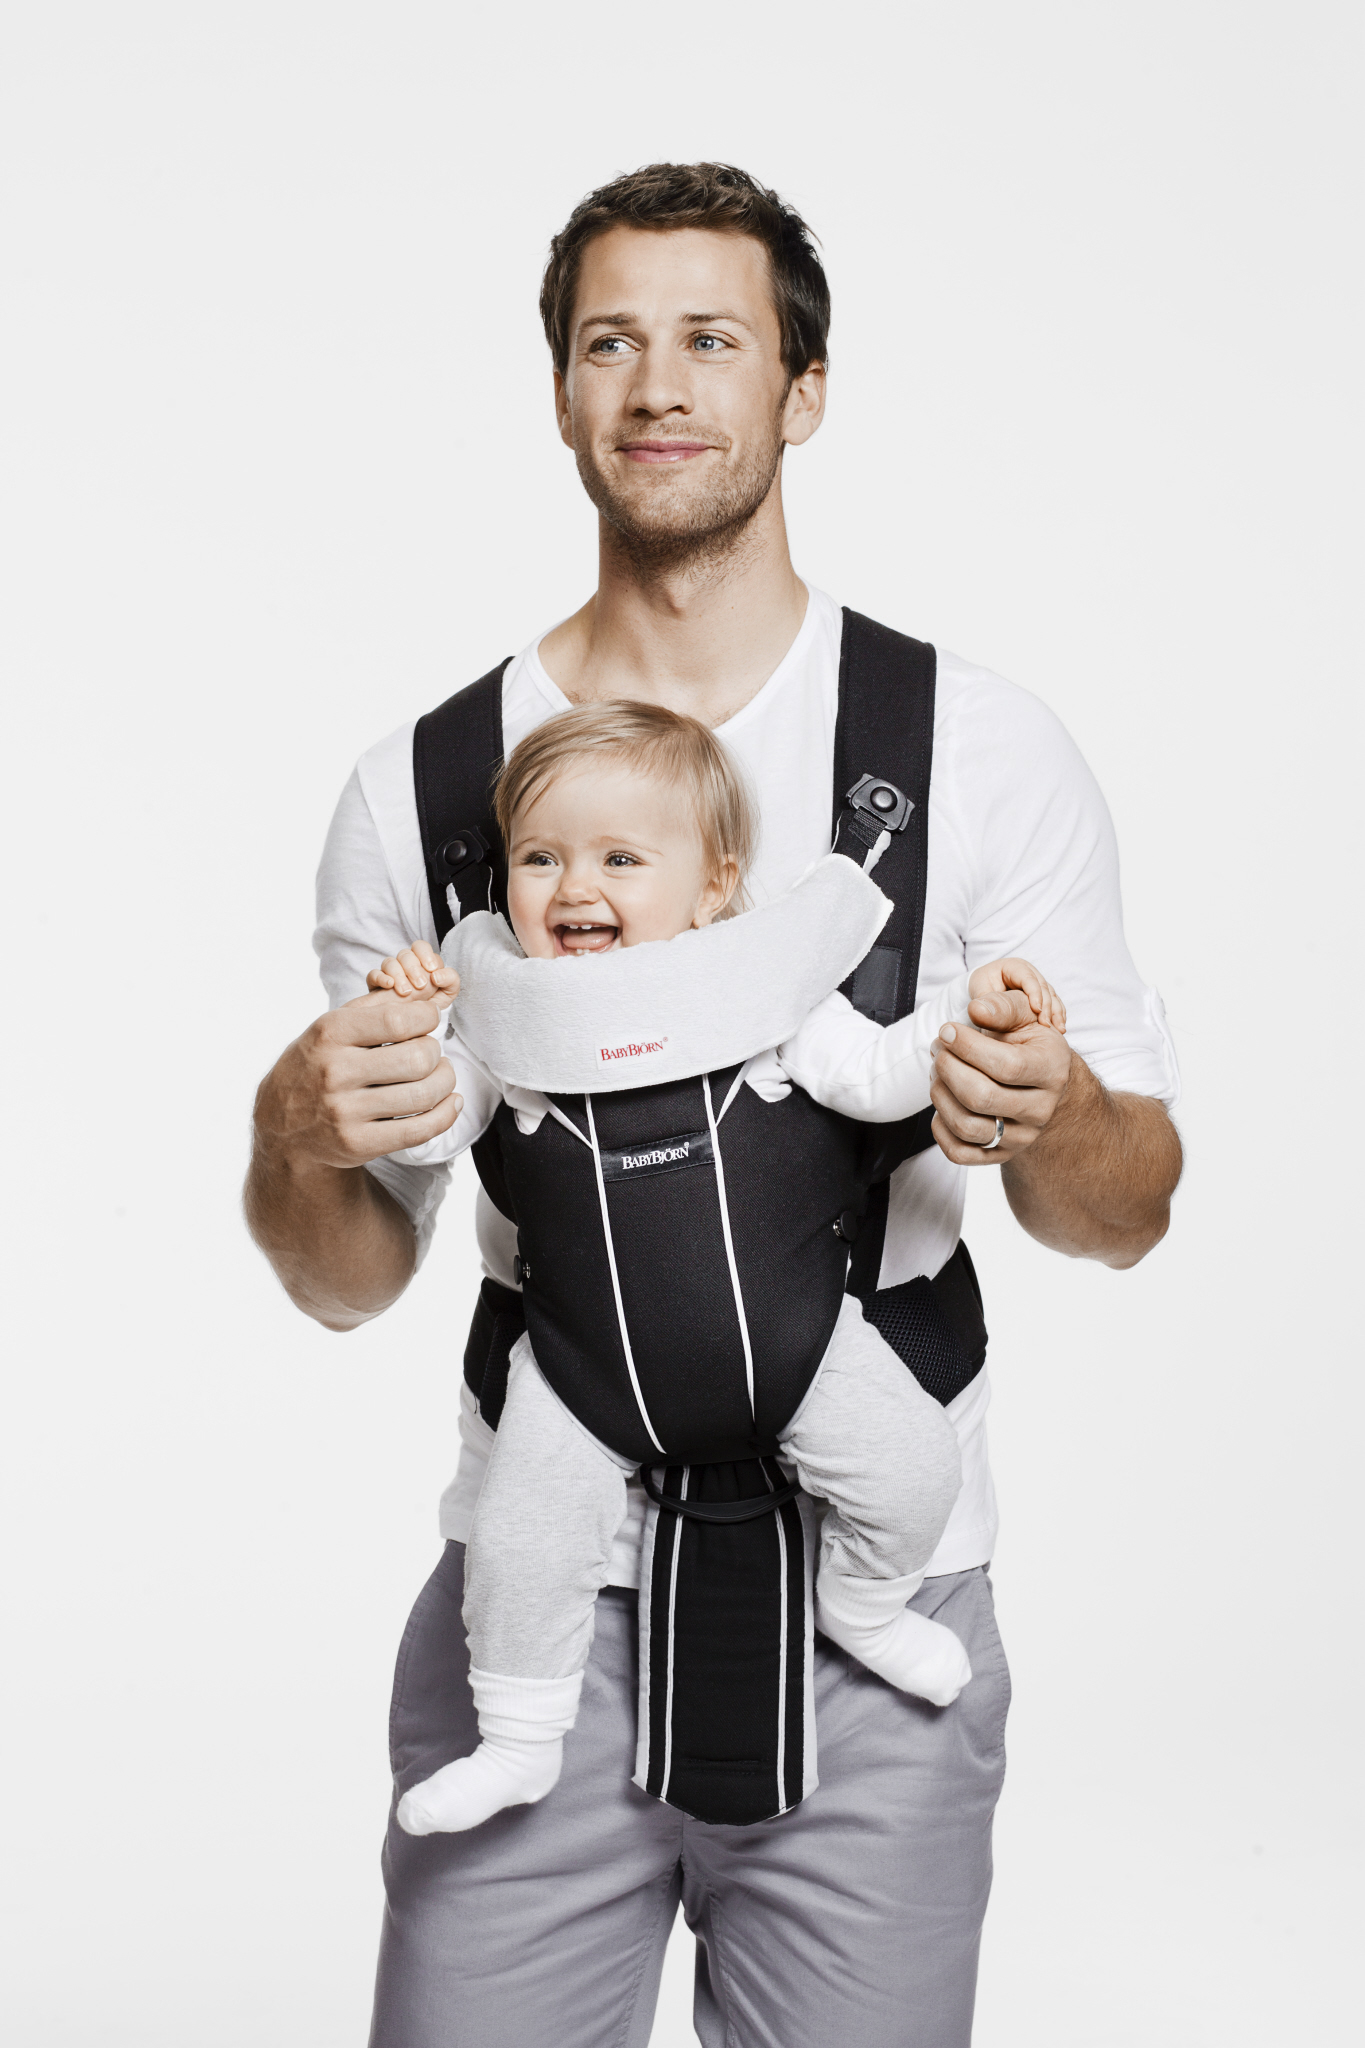 Baby Snugli Carrier - Is It Any Really Good?